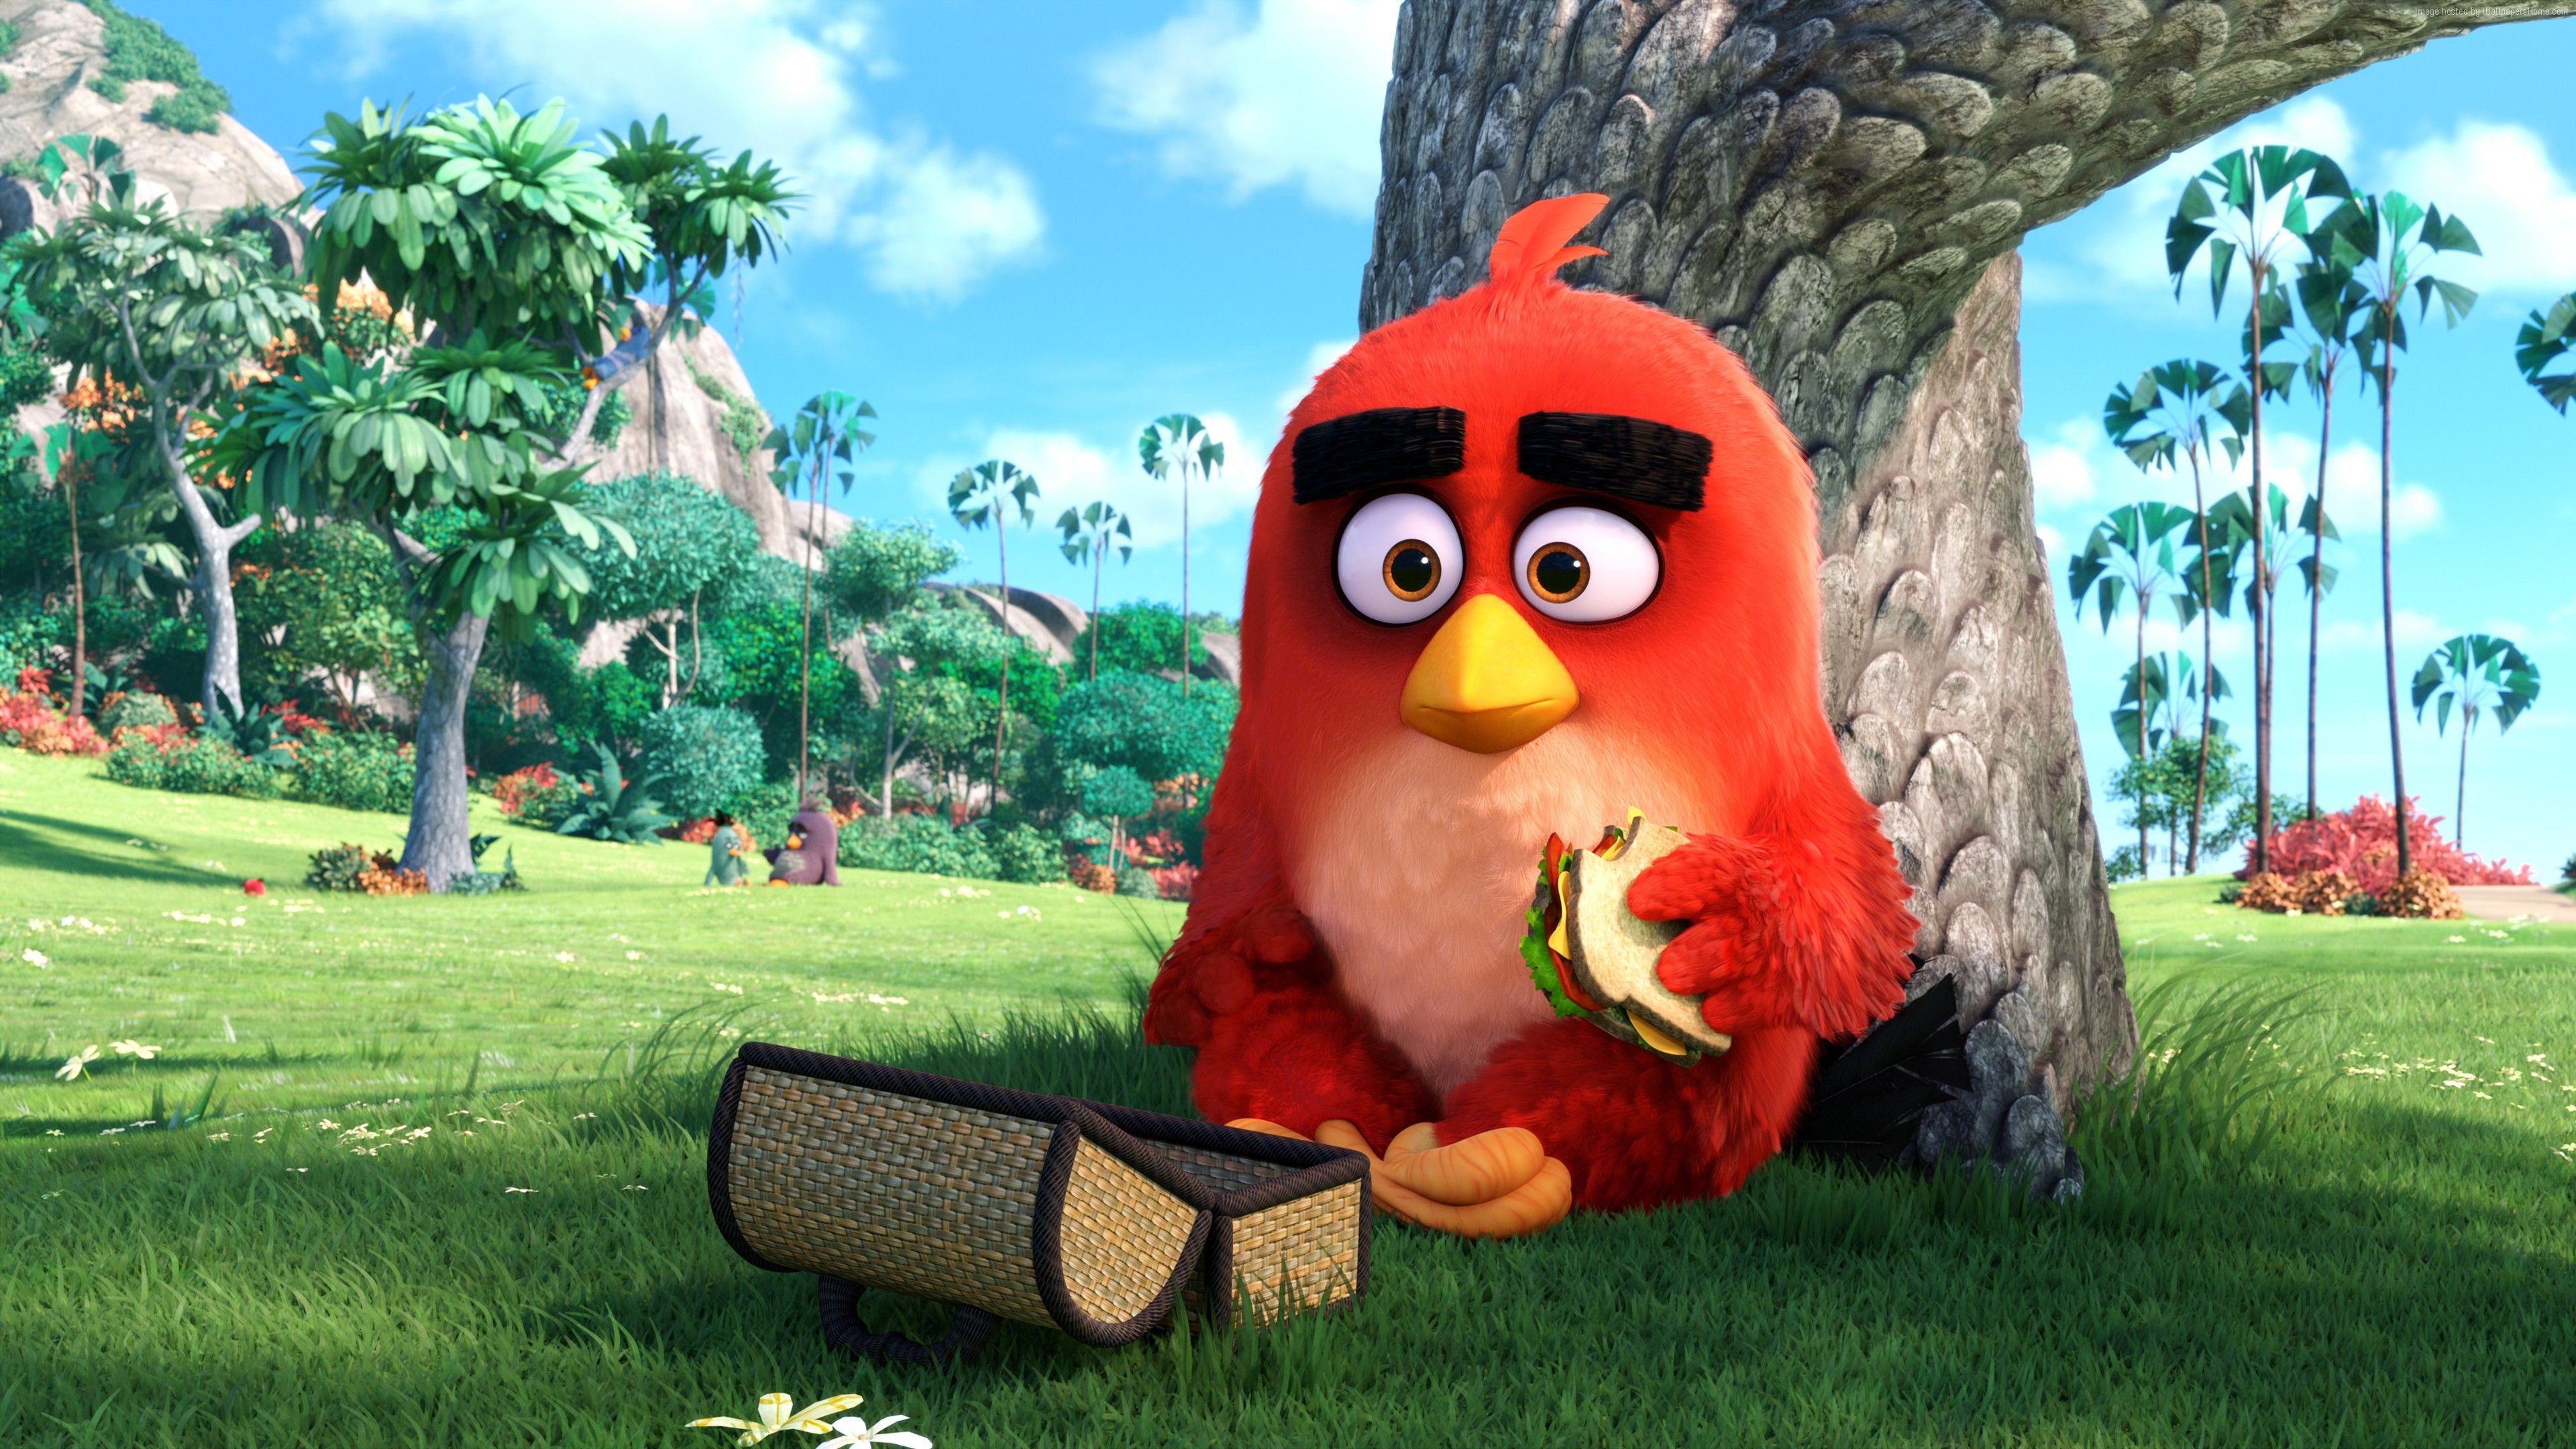 Wallpaper Red, Angry Birds, 4K, Movies,. Wallpaper for iPhone, Android, Mobile and Desktop